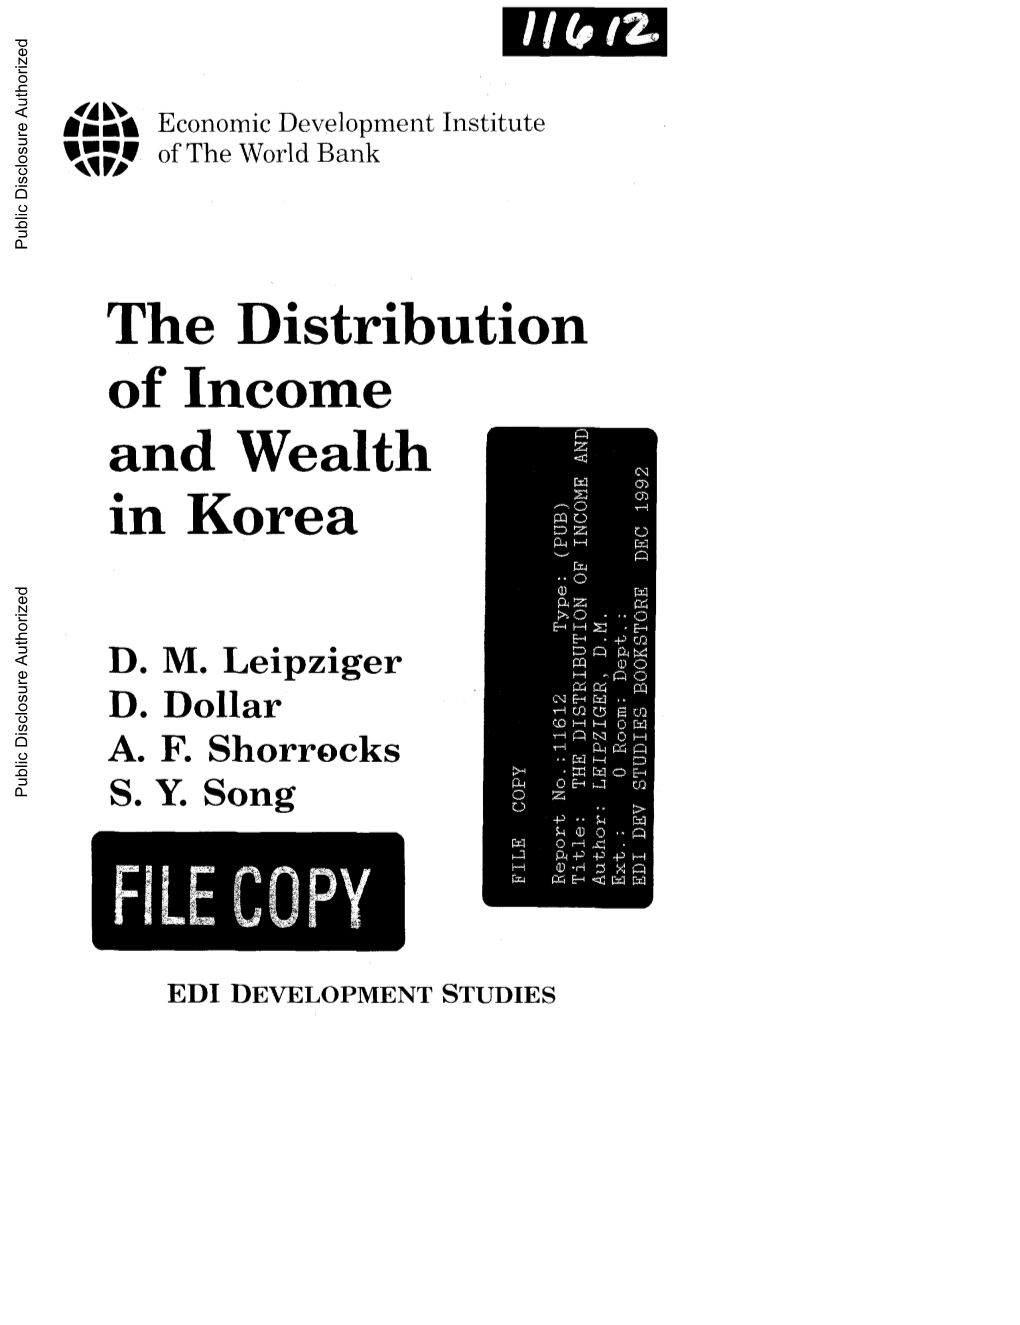 The Distribution of Income and Wealth in Korea